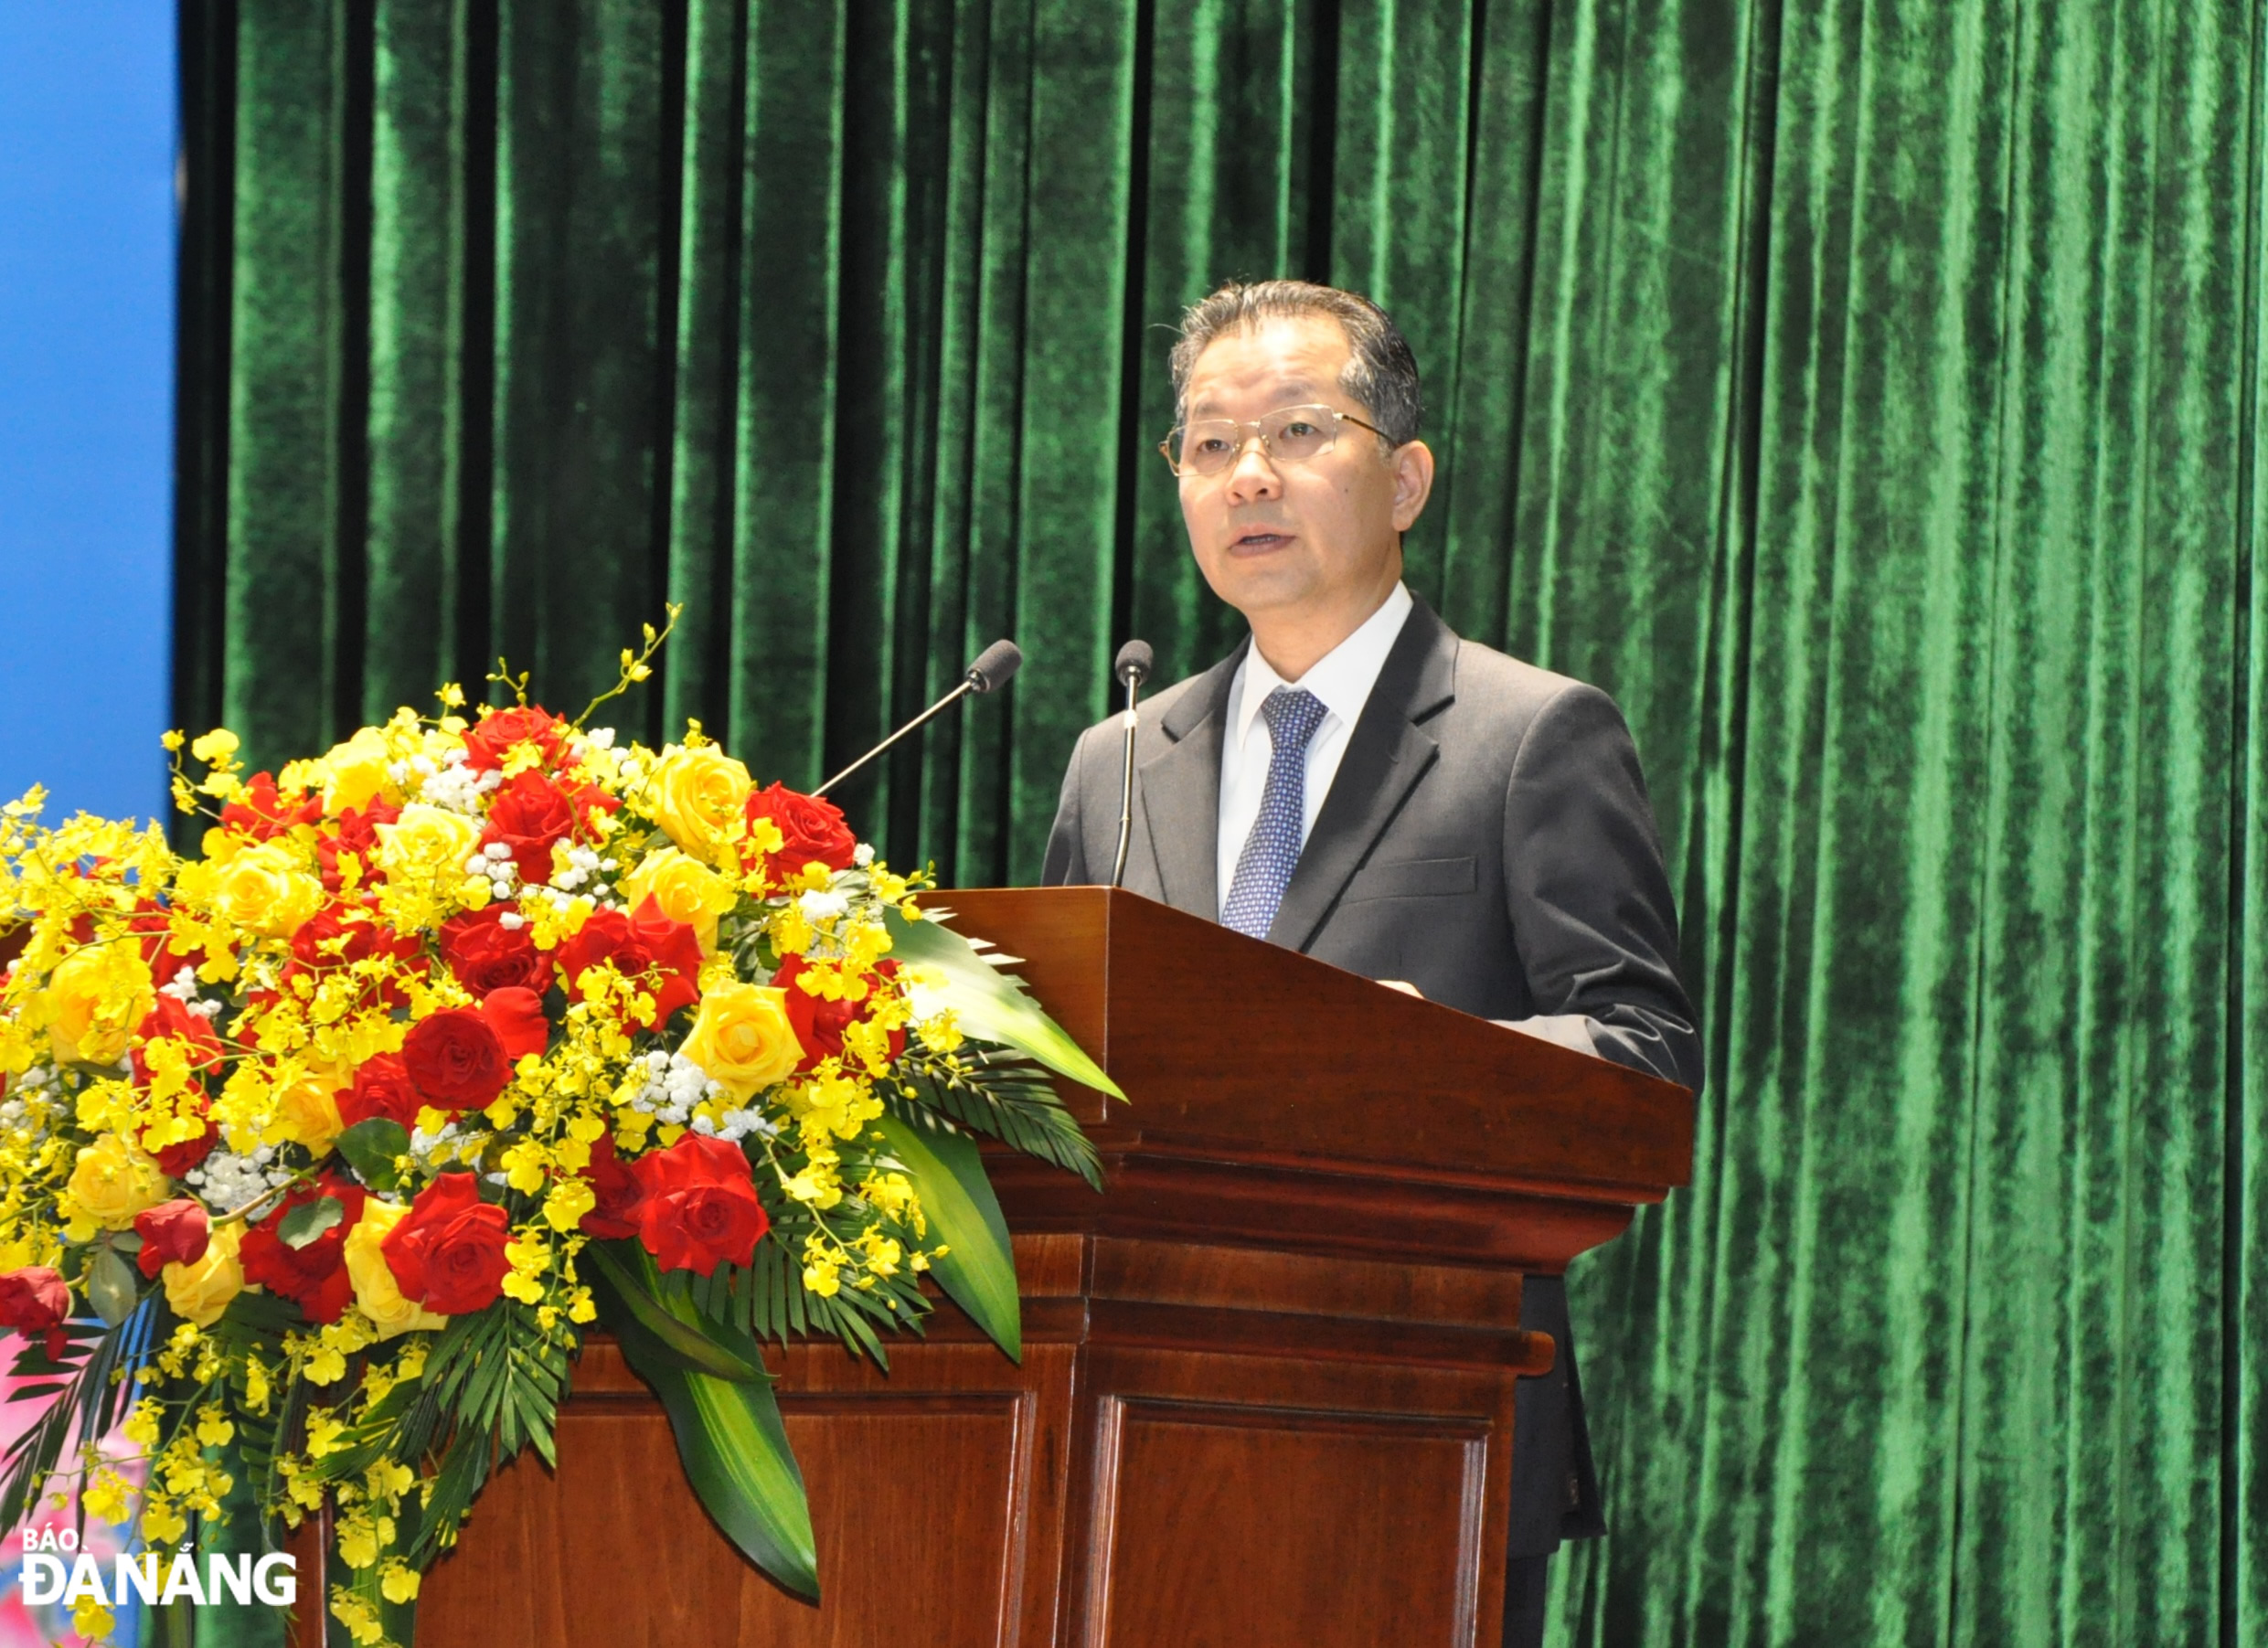 Da Nang Party Committee Secretary Nguyen Van Quang speaking at the event